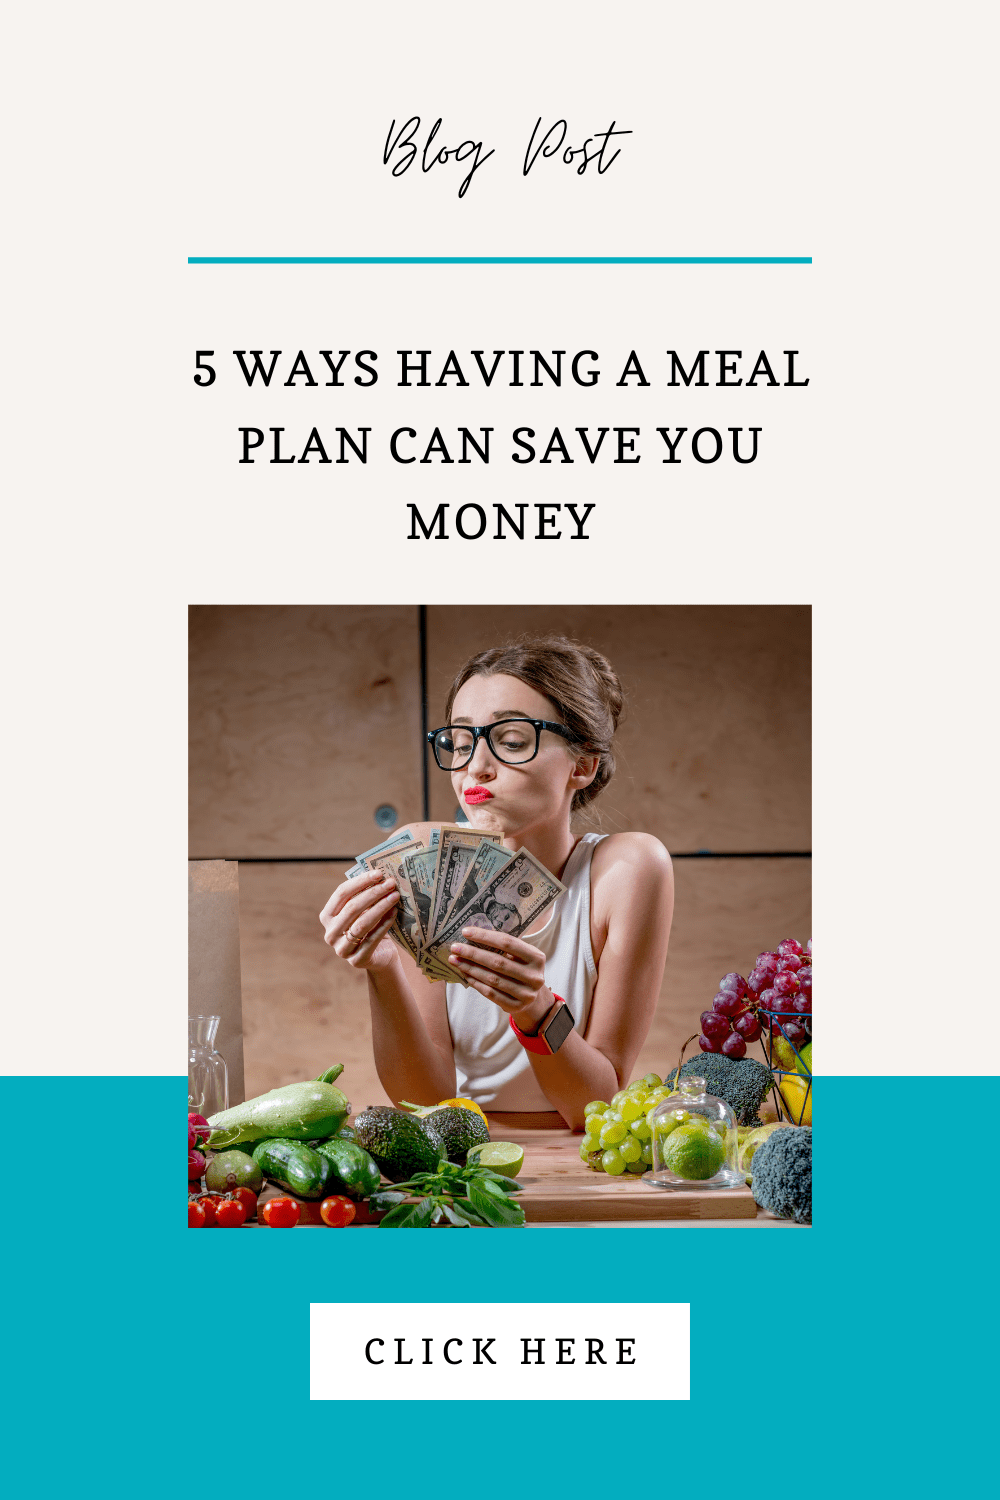 How Does Meal Planning Save Money